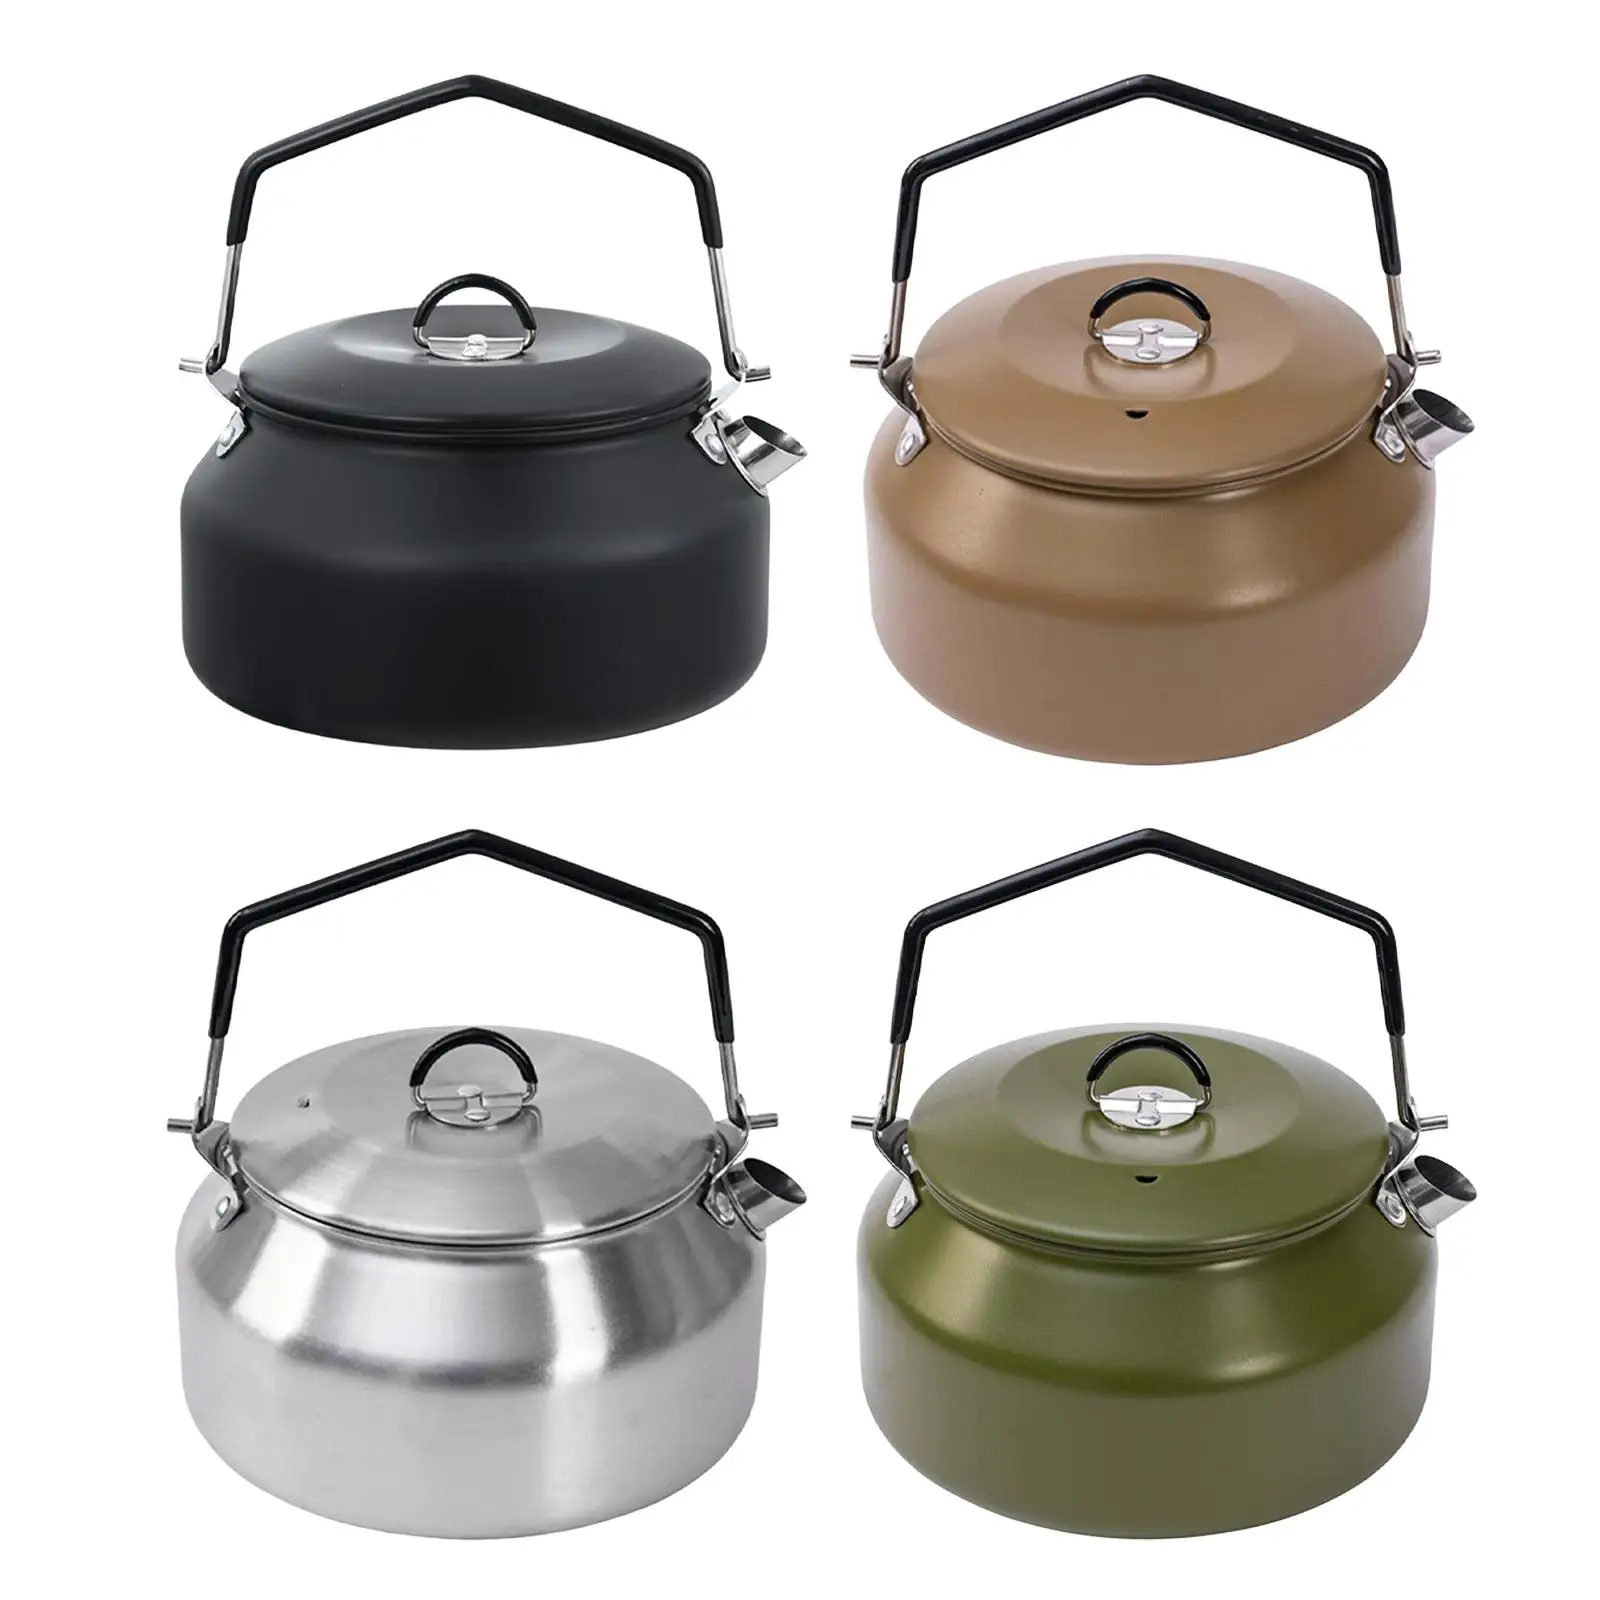 Camping Kettle with Lid Drinkware Lightweight Camping Pot Camping Tea Pot for Fishing Backpacking Traveling Climbing Camping